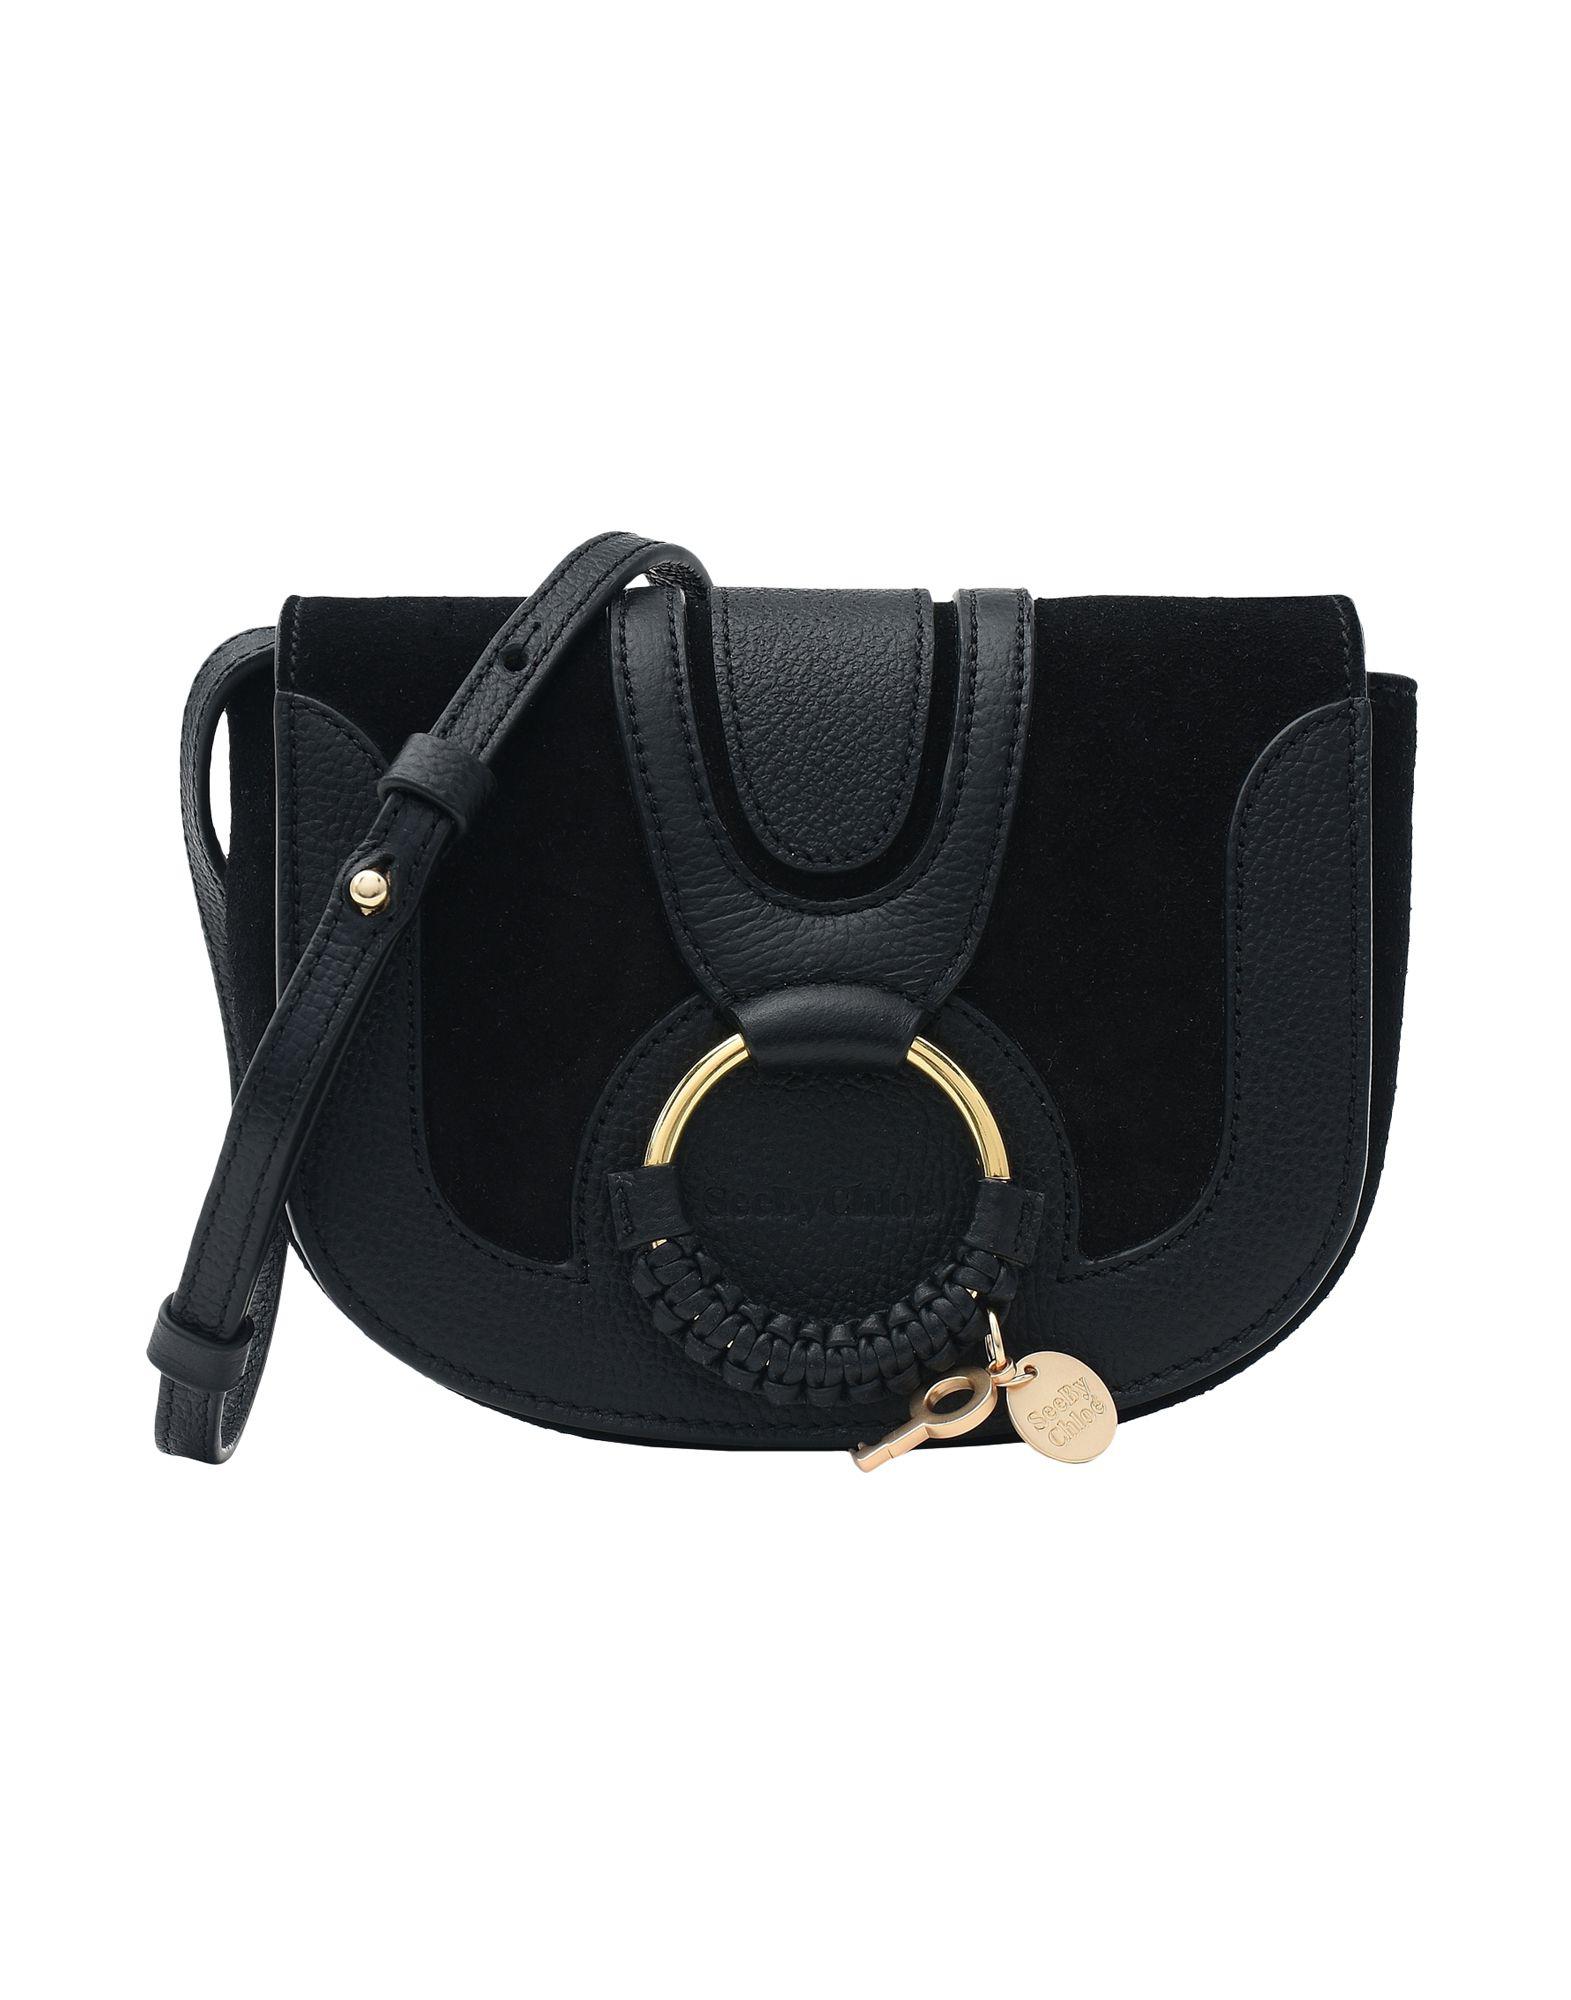 See By Chloé Leather Cross-body Bag in Black - Lyst